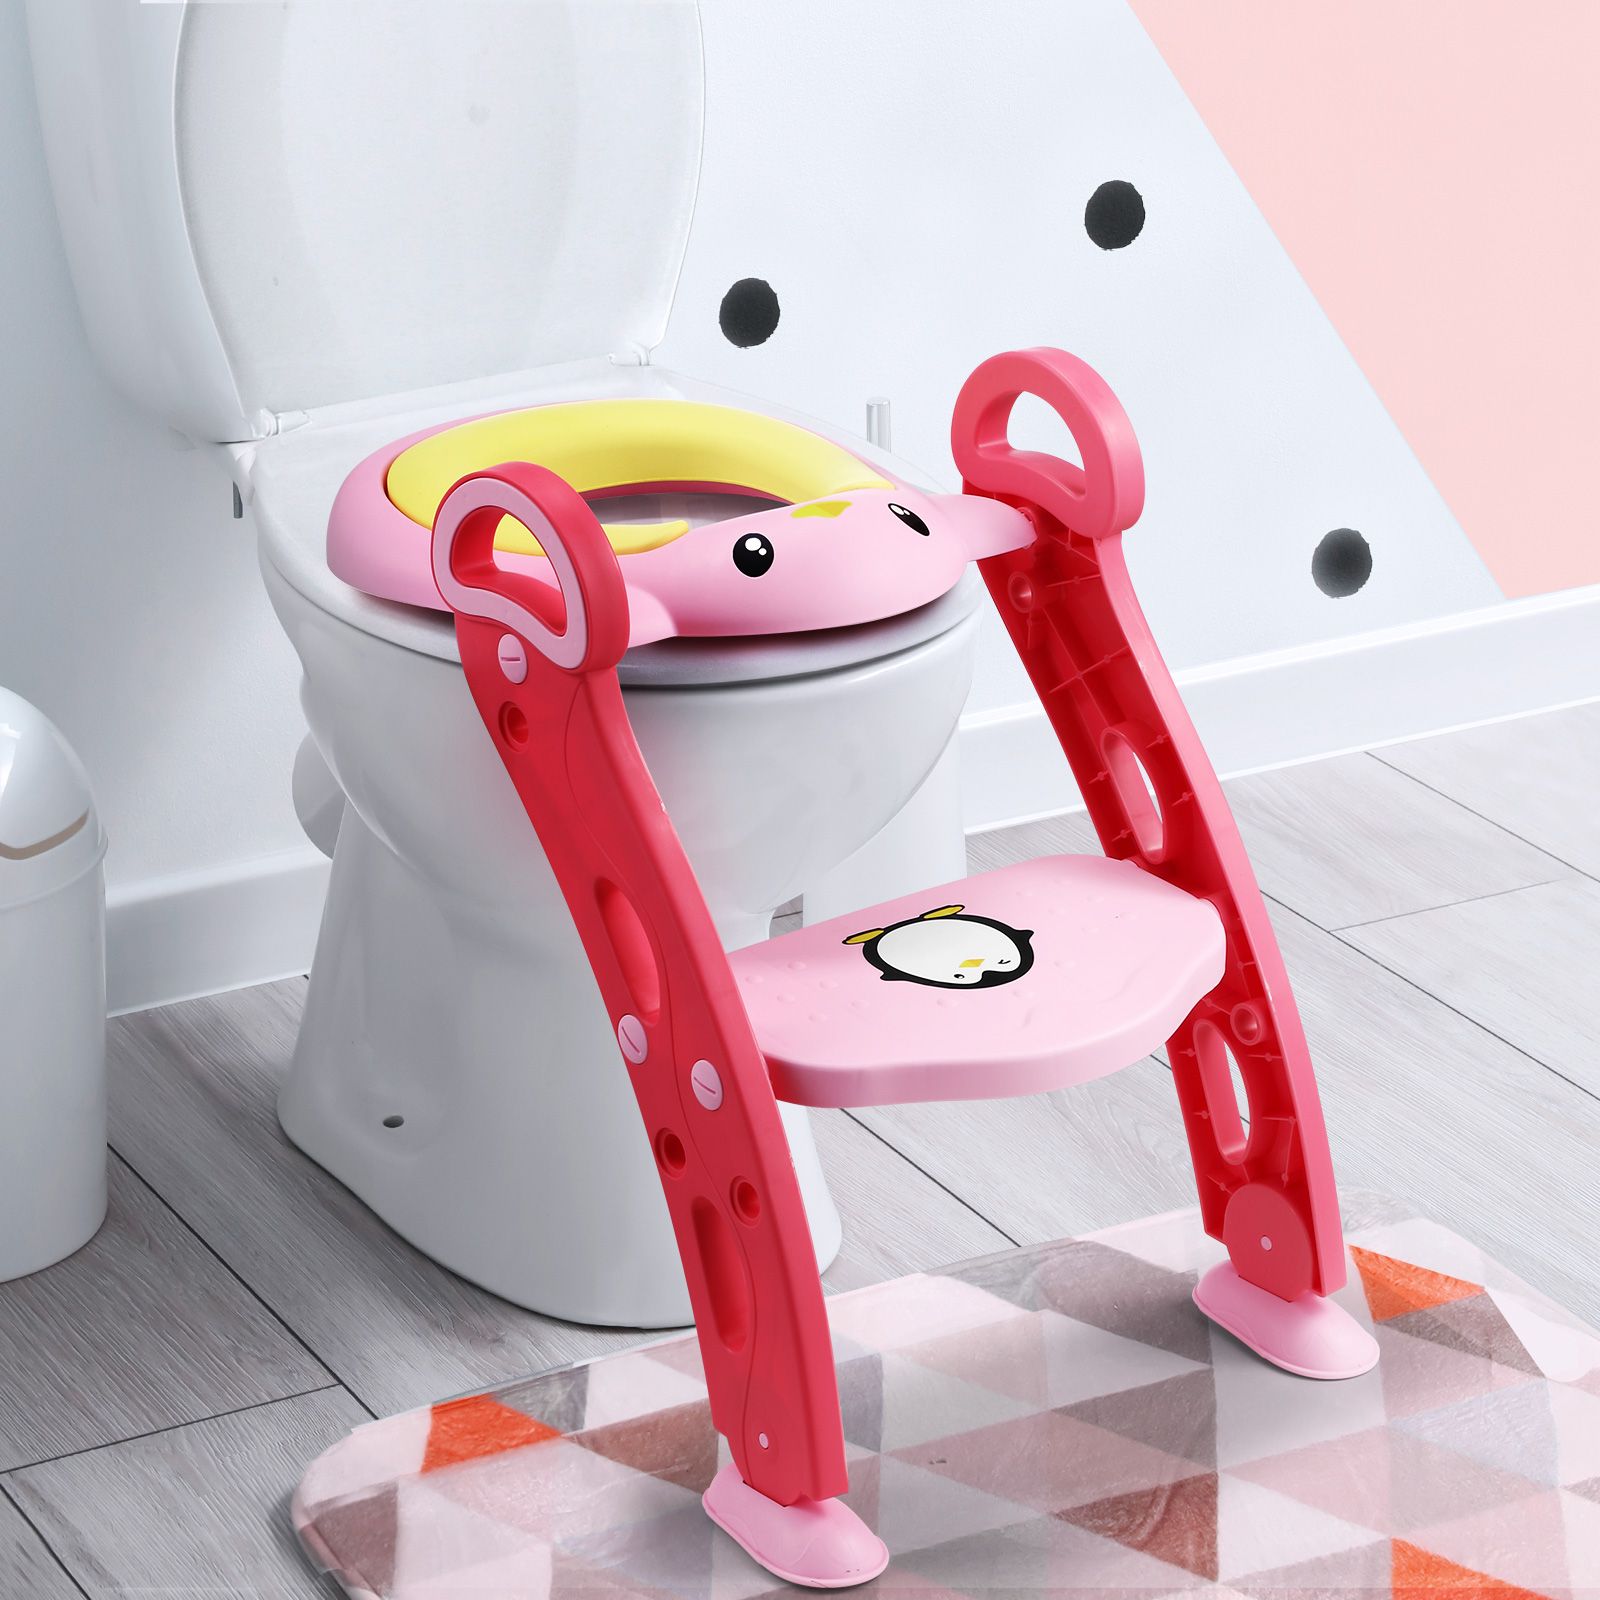 Potty Training Seat with Ladder Adjustable Toddler Toilet Training Potty Seat with Step Stool for Kids Girls and Boys Comfortable Cushion Safe Handle Anti-Slip Pads 